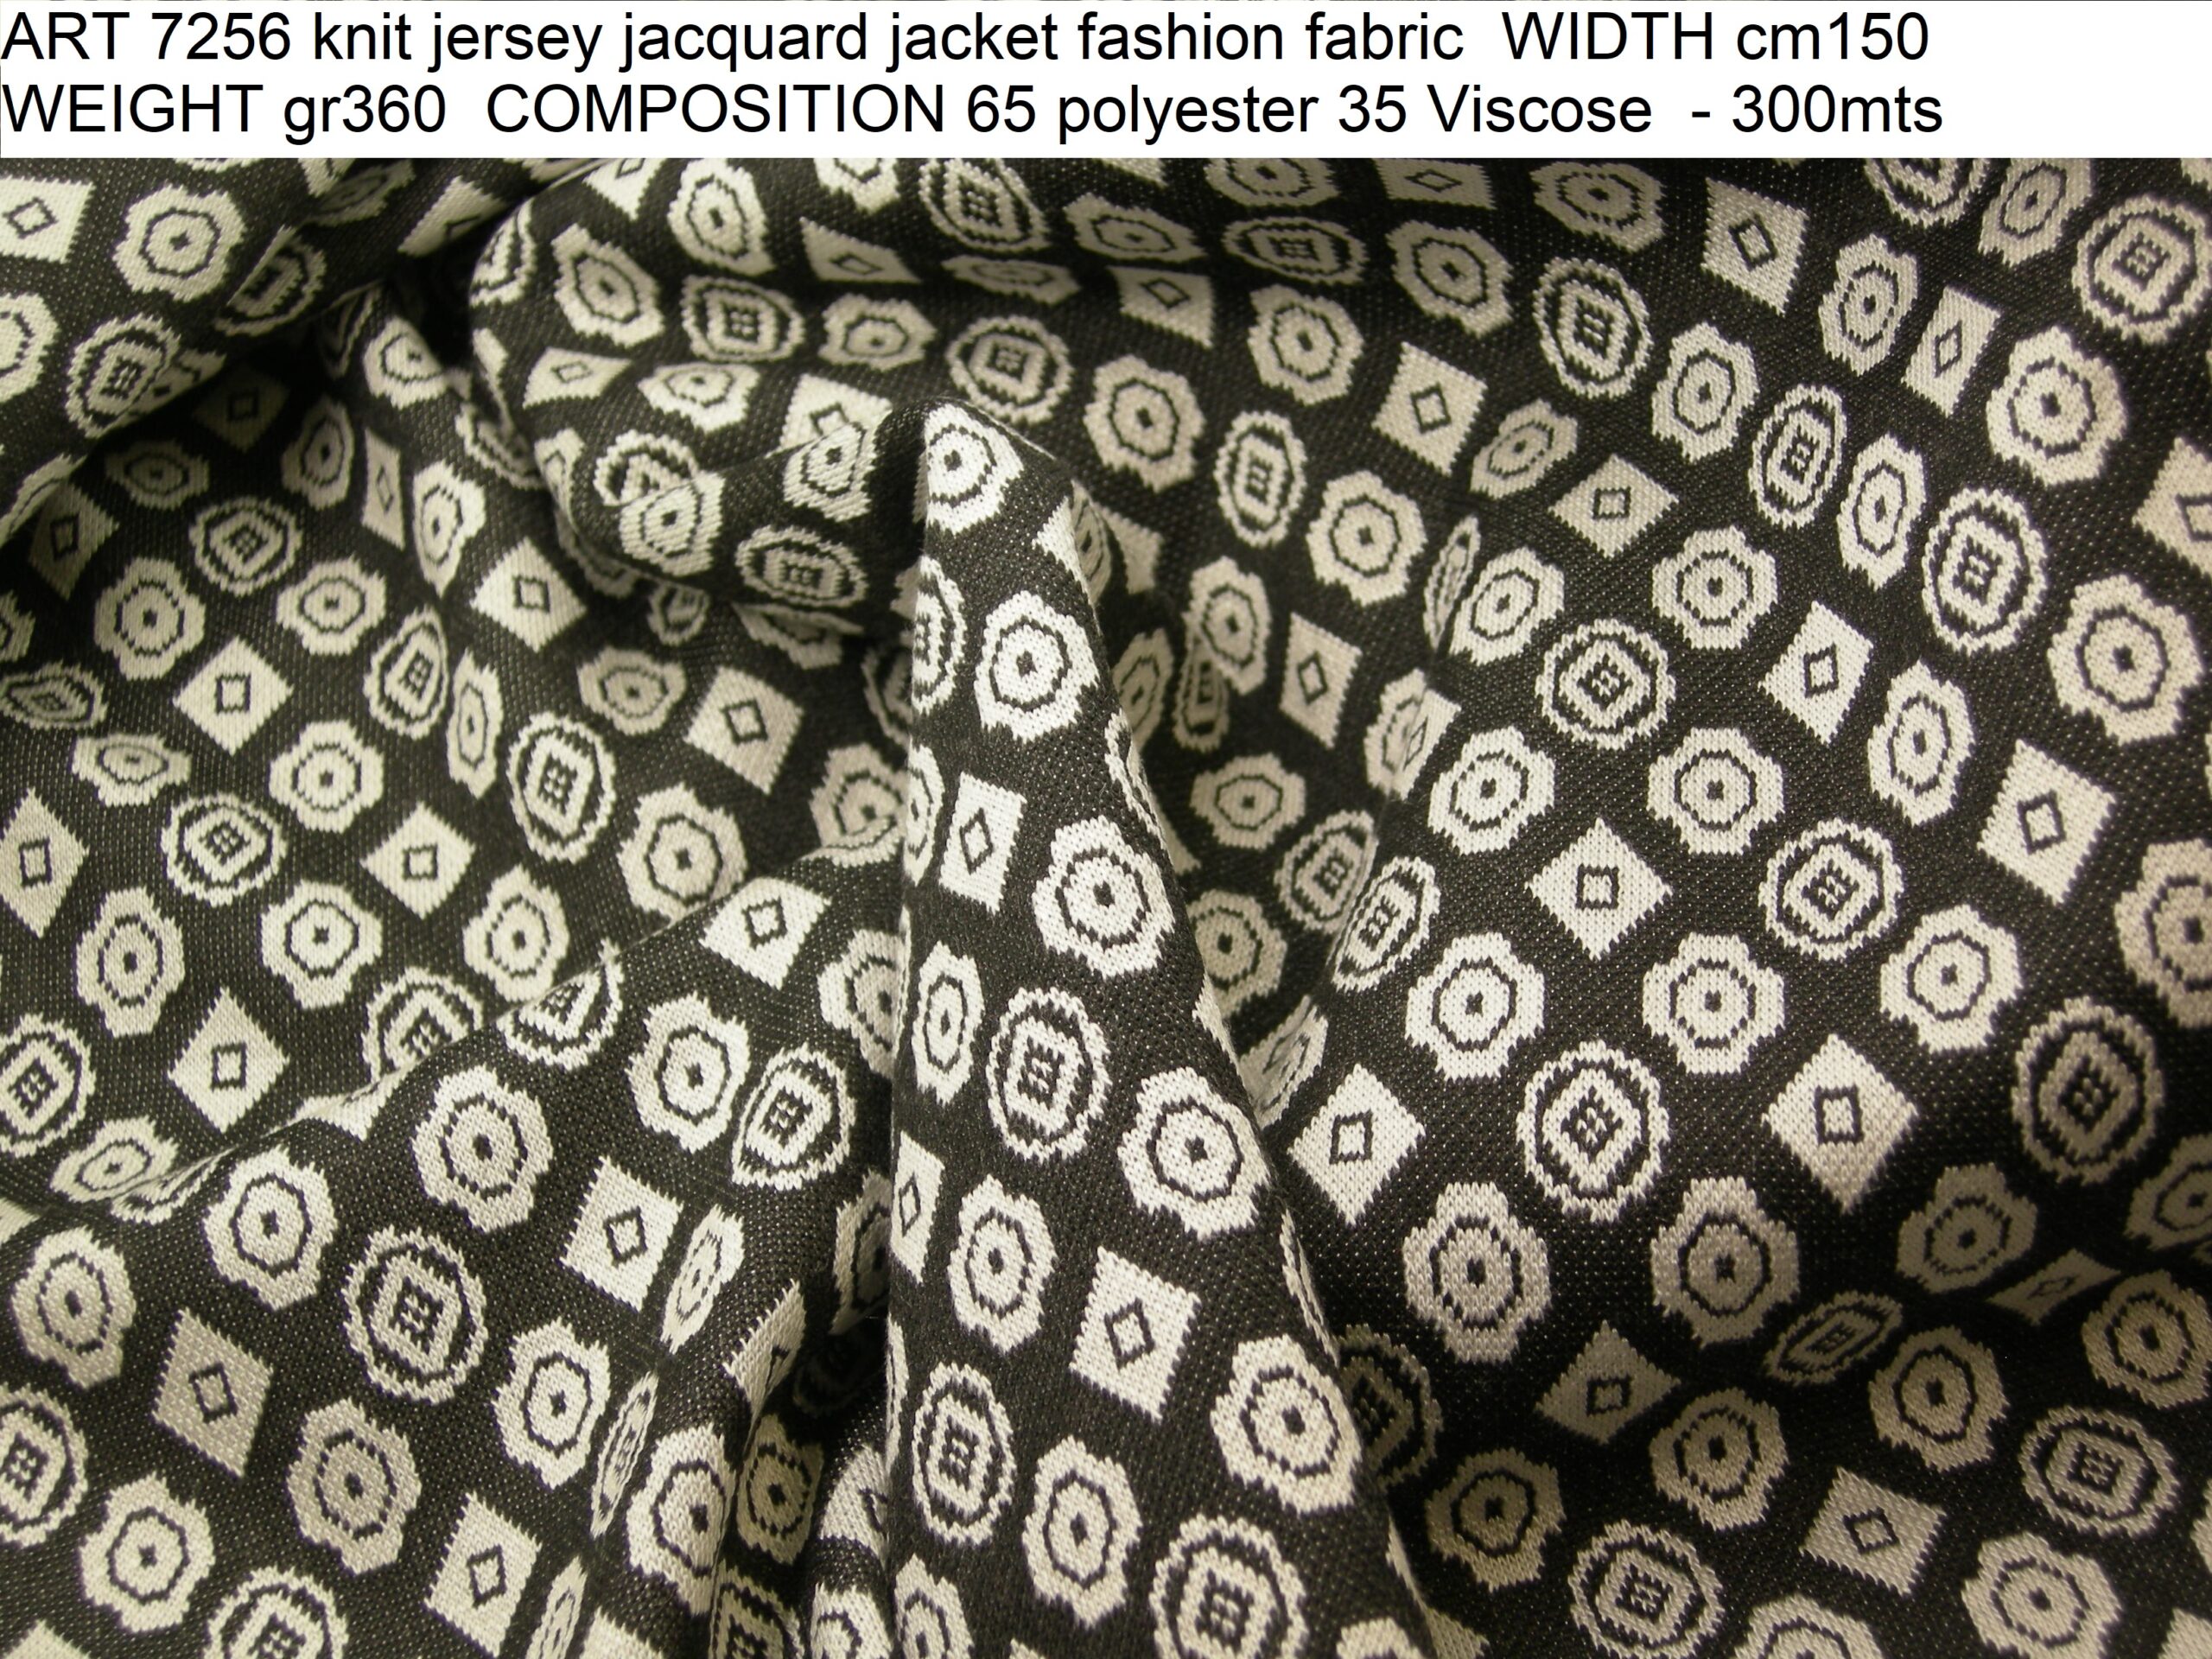 ART 7256 knit jersey jacquard jacket fashion fabric WIDTH cm150 WEIGHT gr360 COMPOSITION 65 polyester 35 Viscose - 300mts